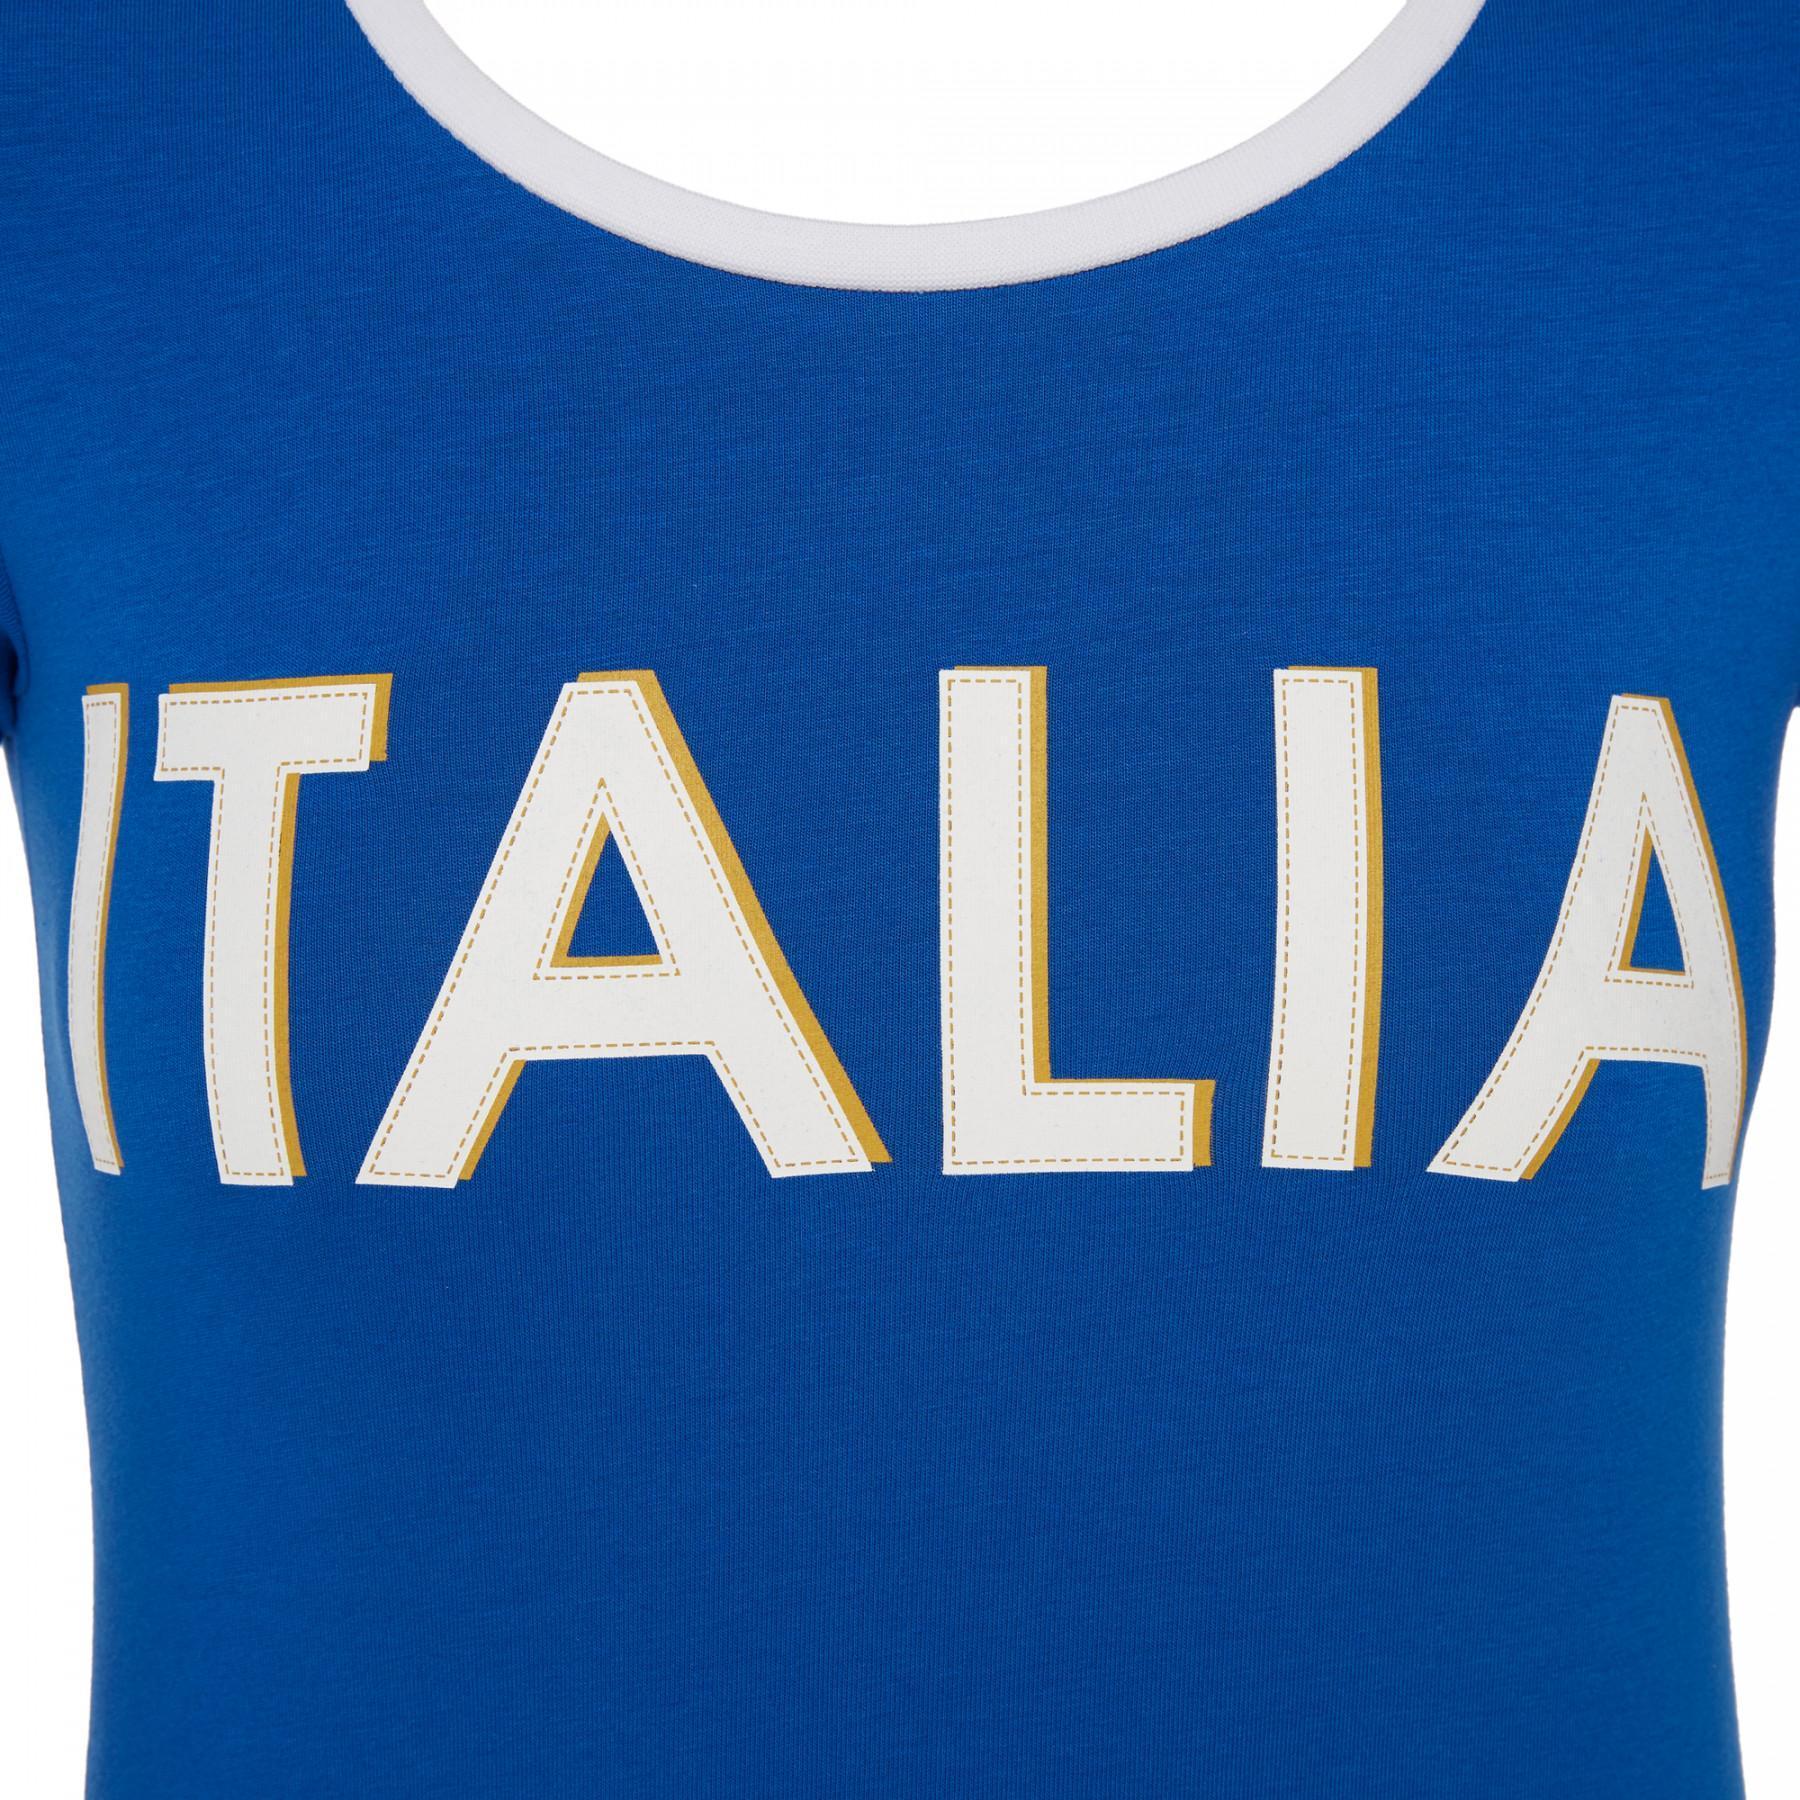 Fan T-shirt vrouw Italie Rugby 2017-2018